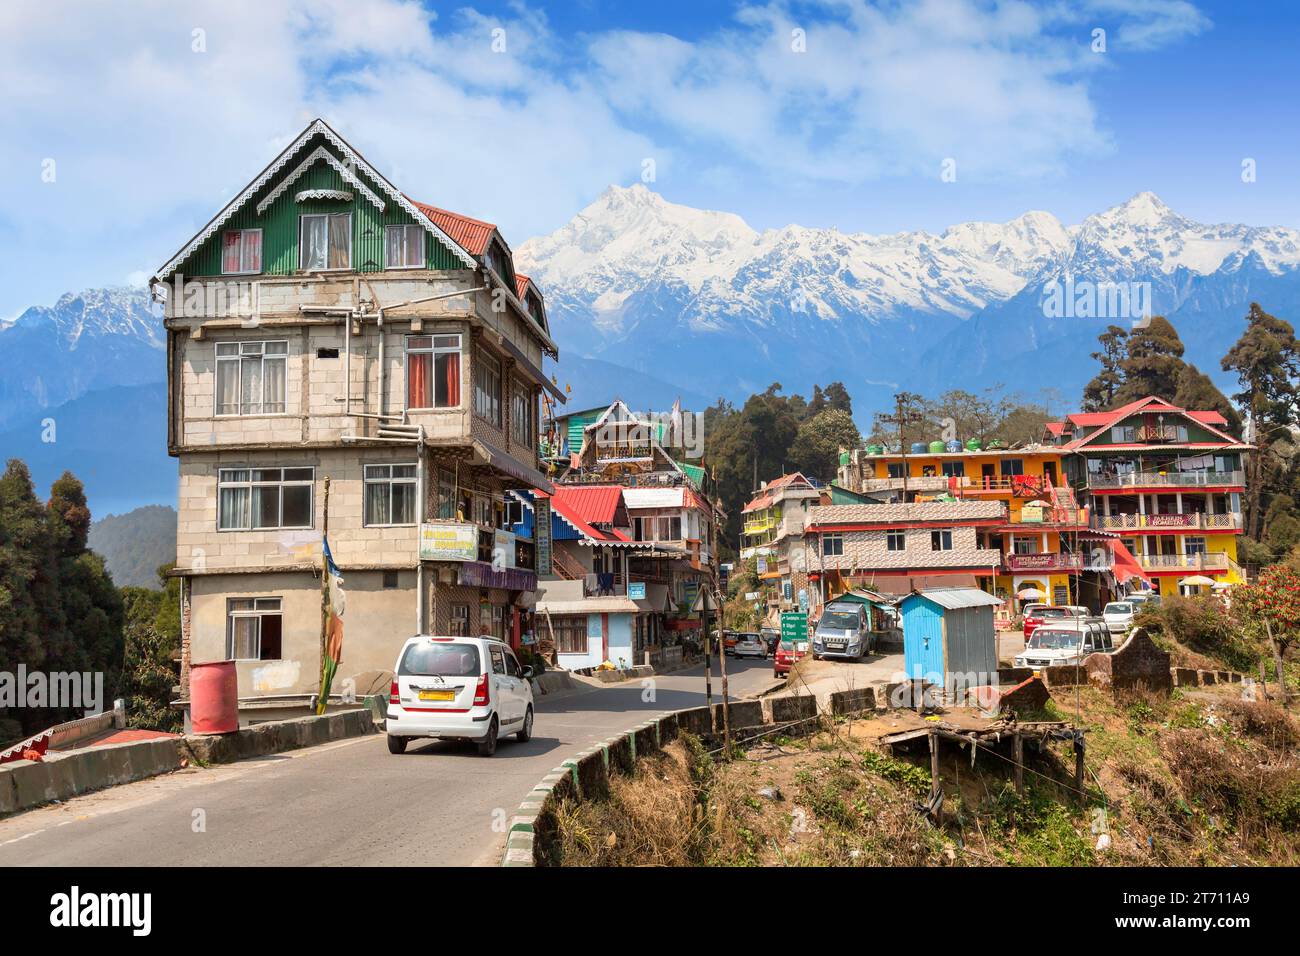 Scenic village town of Tinchuley in the district of Darjeeling, India with view of Kanchenjunga Himalaya mountain range. Stock Photo